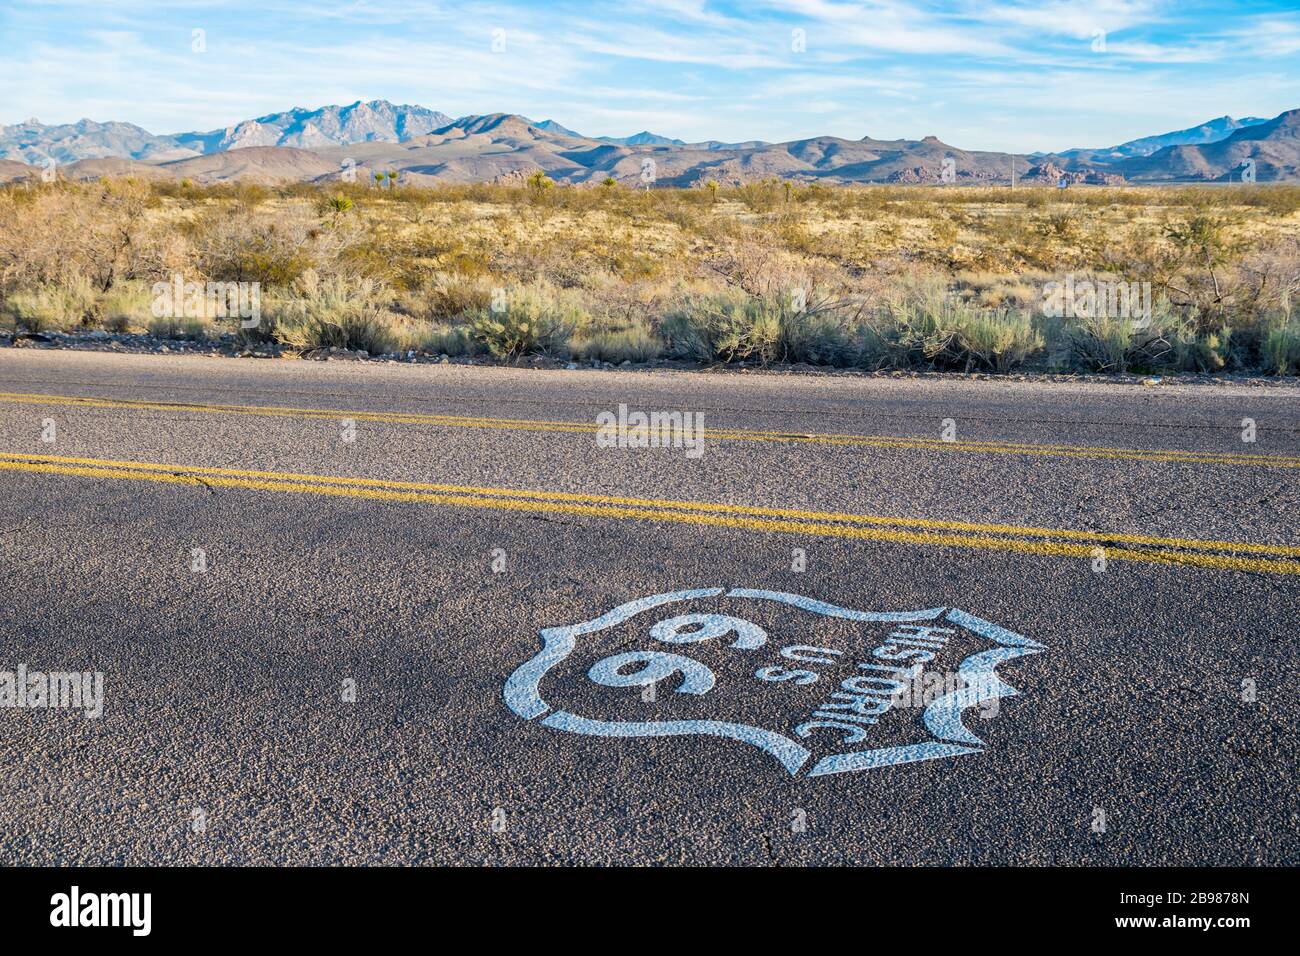 Historic US Route 66 highway sign on asphalt Stock Photo